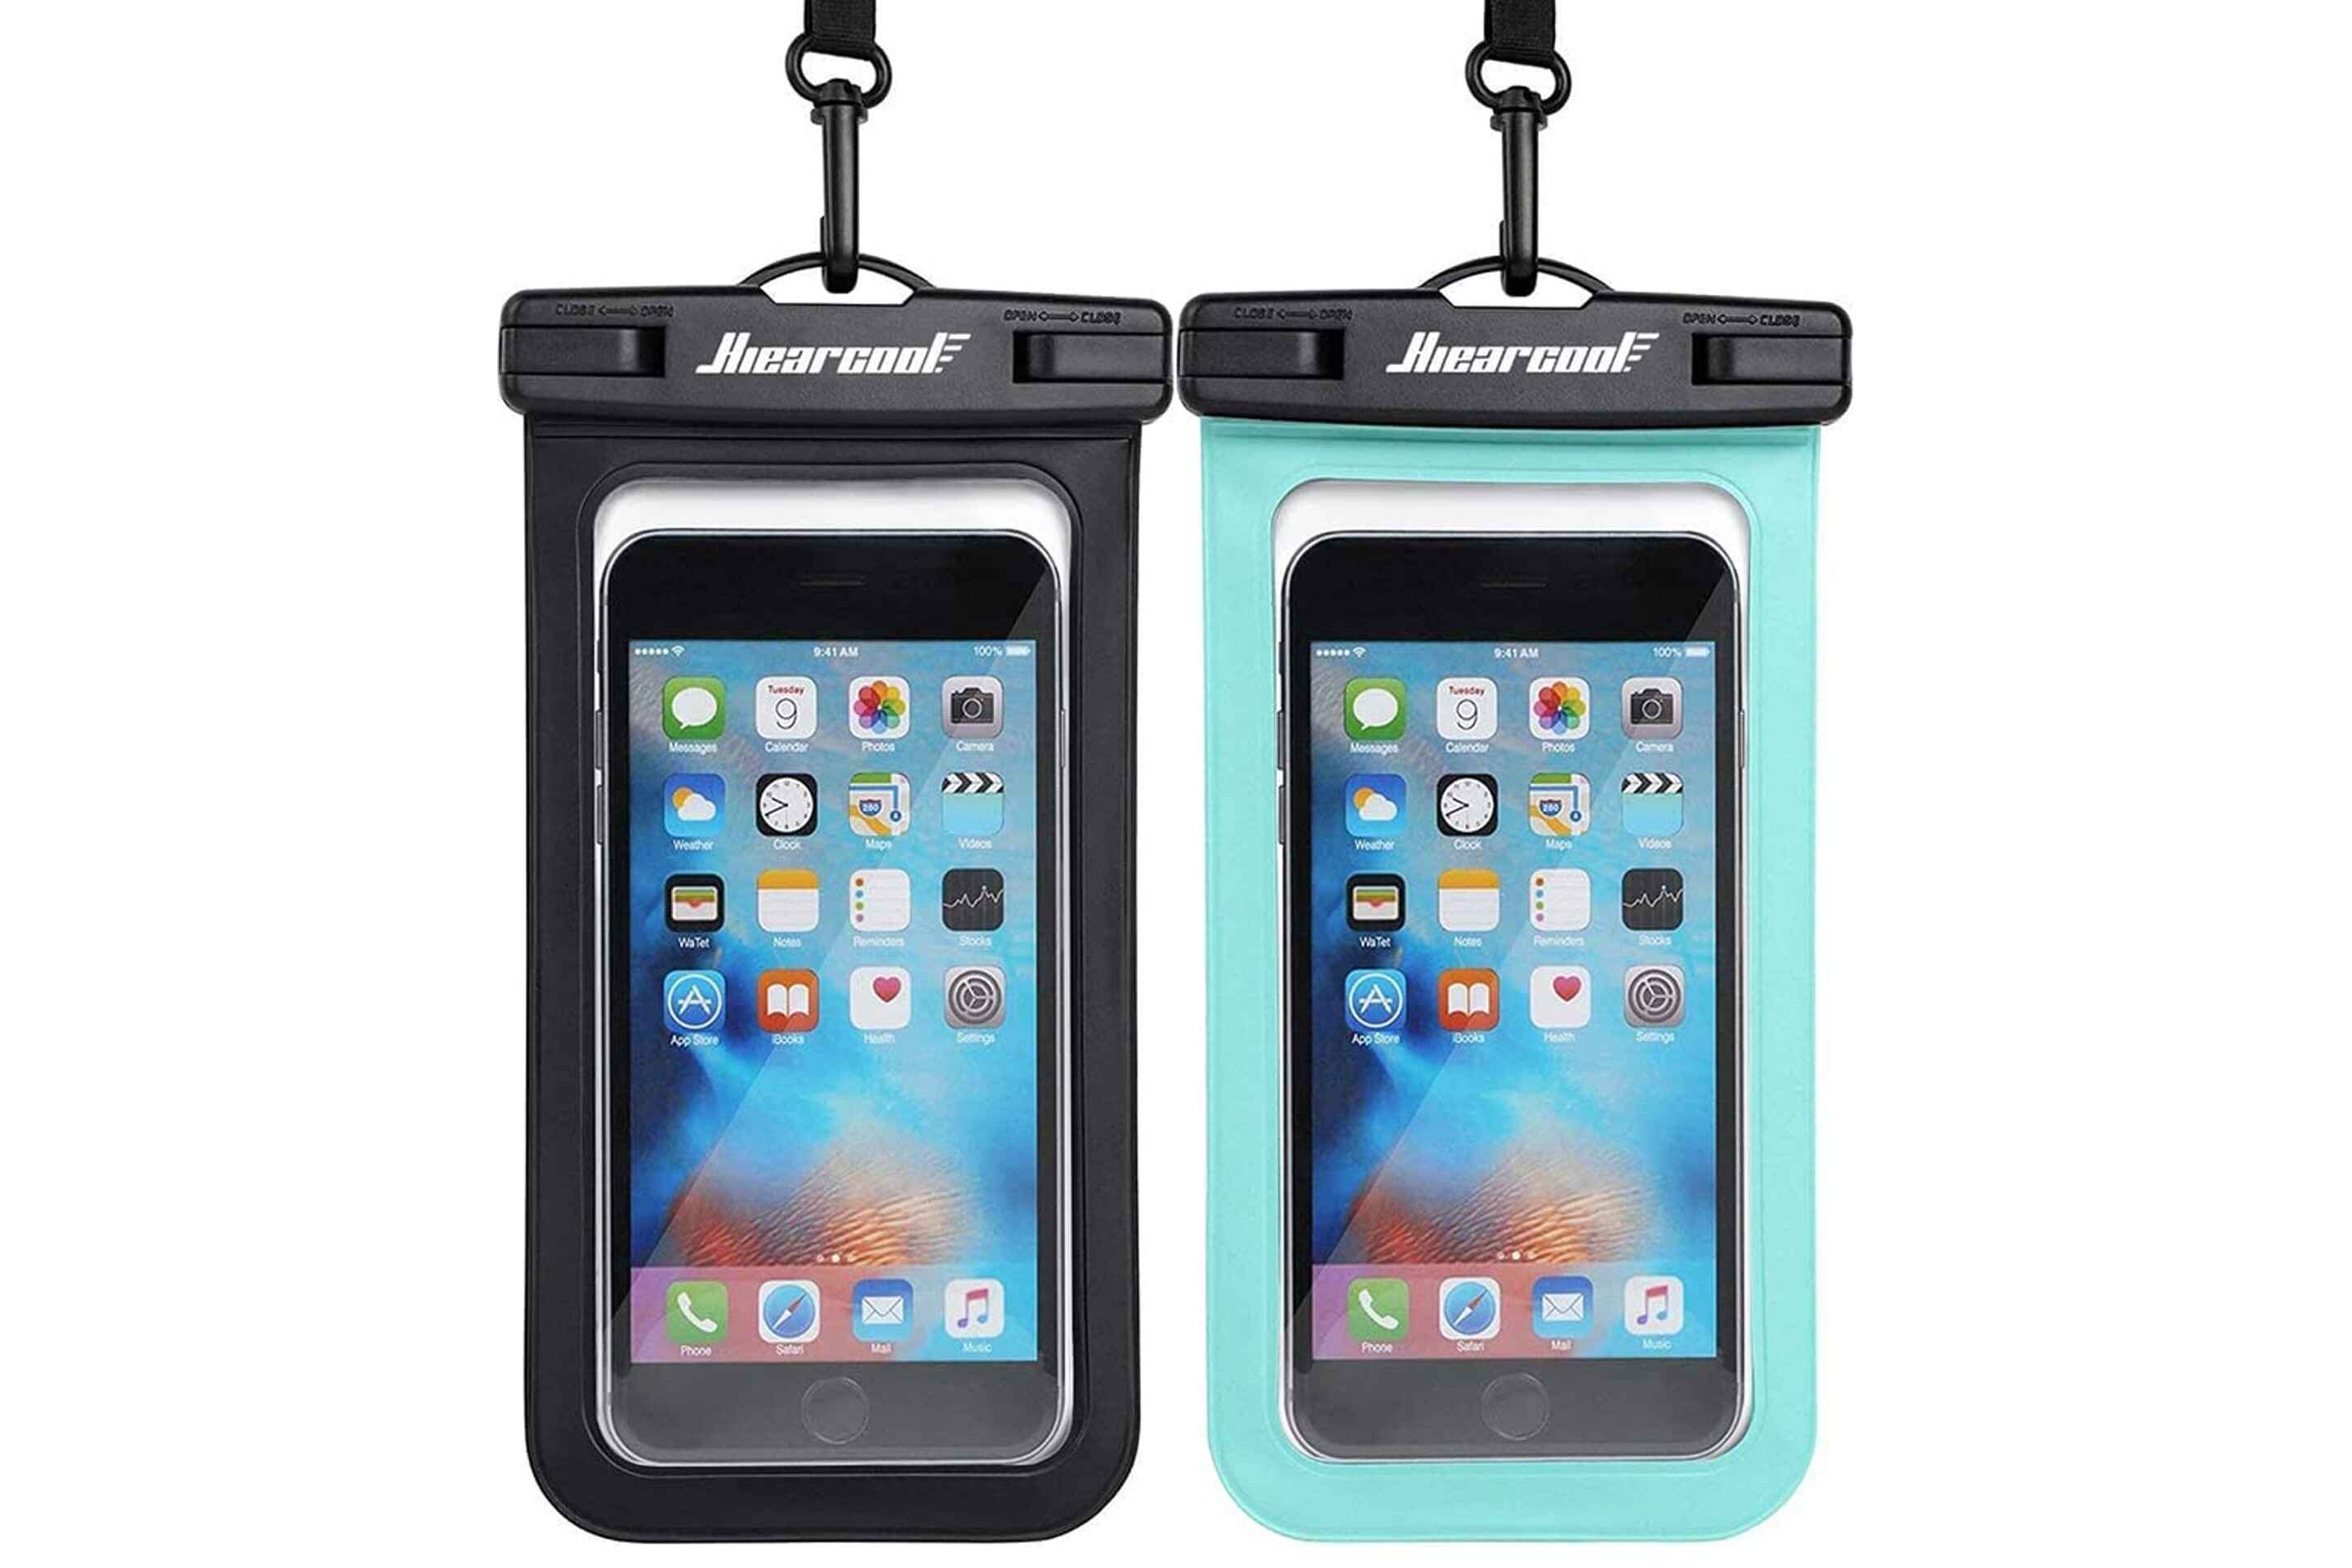 Top Retailers And Online Stores To Purchase Quality Waterproof Phone Cases